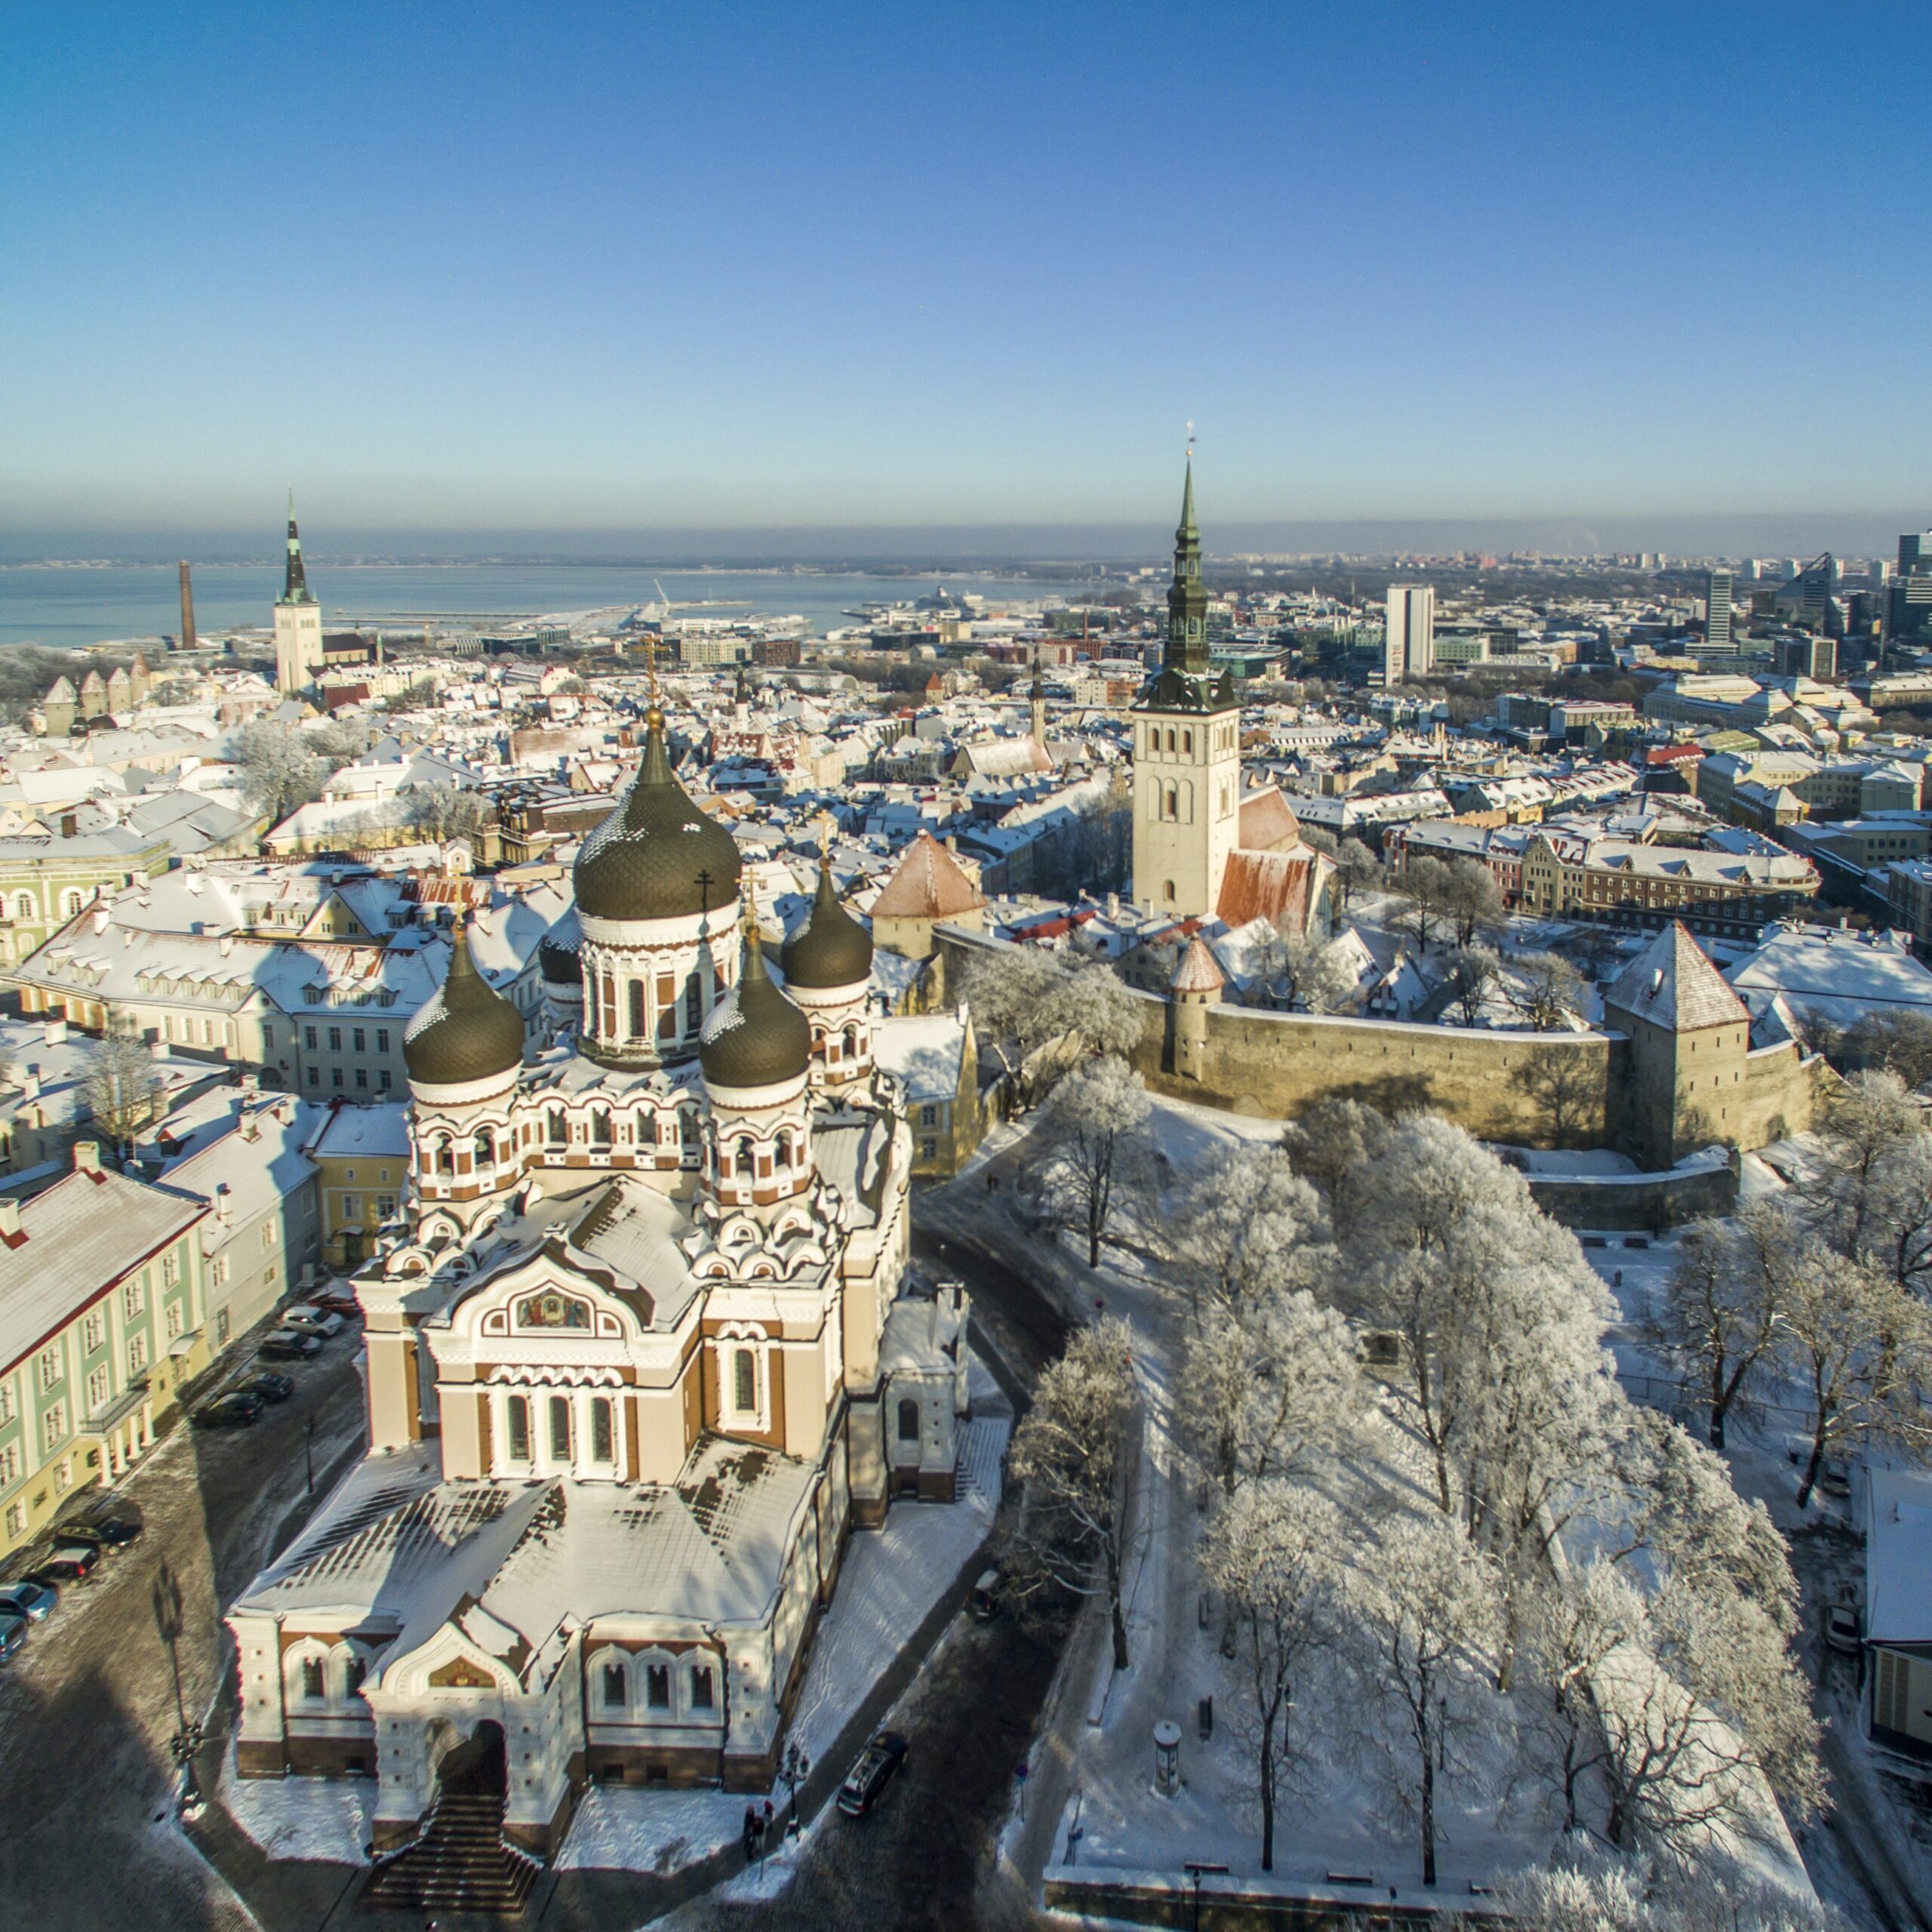 Estonia: Digital marriage and app elections in next wave of transformation